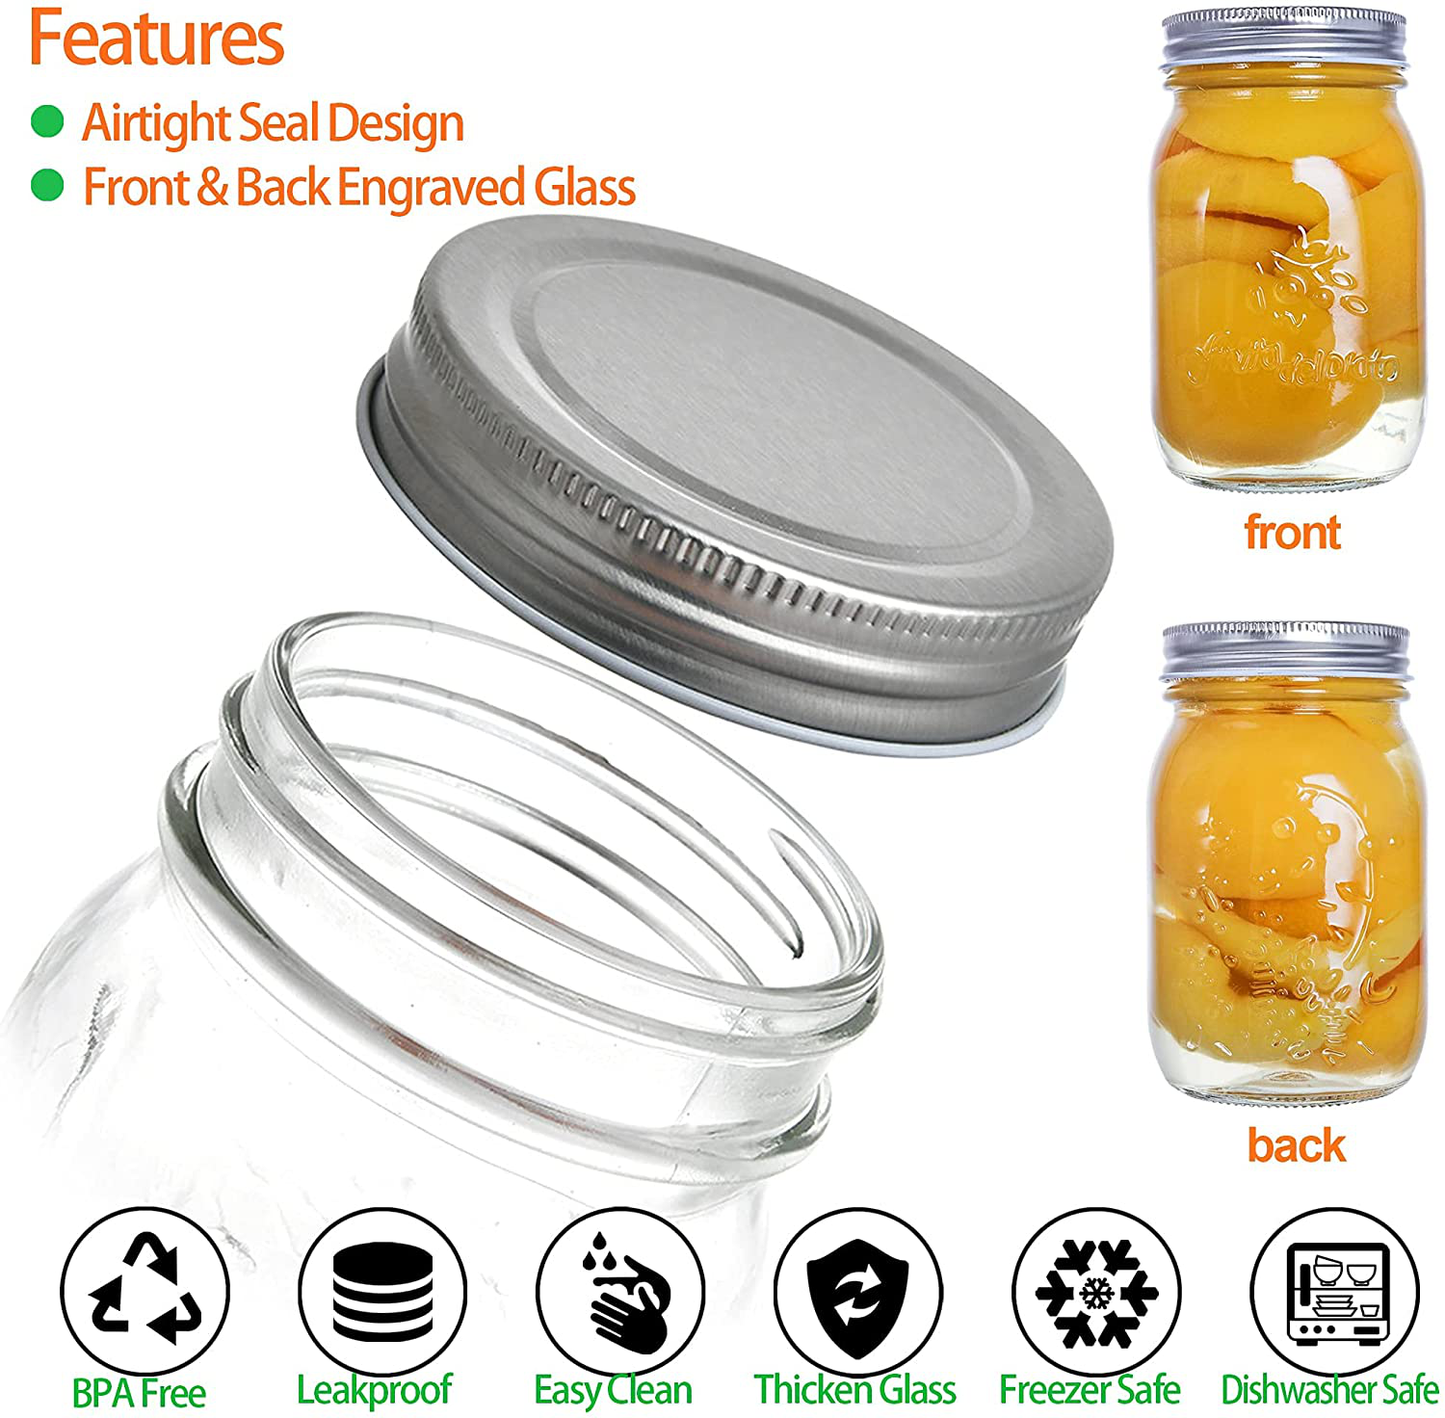 Mason Jars 16 OZ,12 Pack Regular Mouth Glass Jars for Sealing, Meal Prep, Jam, Honey, Overnight Oats, Food Storage, Canning, Preserving, Drinking, DIY Decors and Projects, Canning Jars with Silver Airtight Lids, Glass Storage Jars